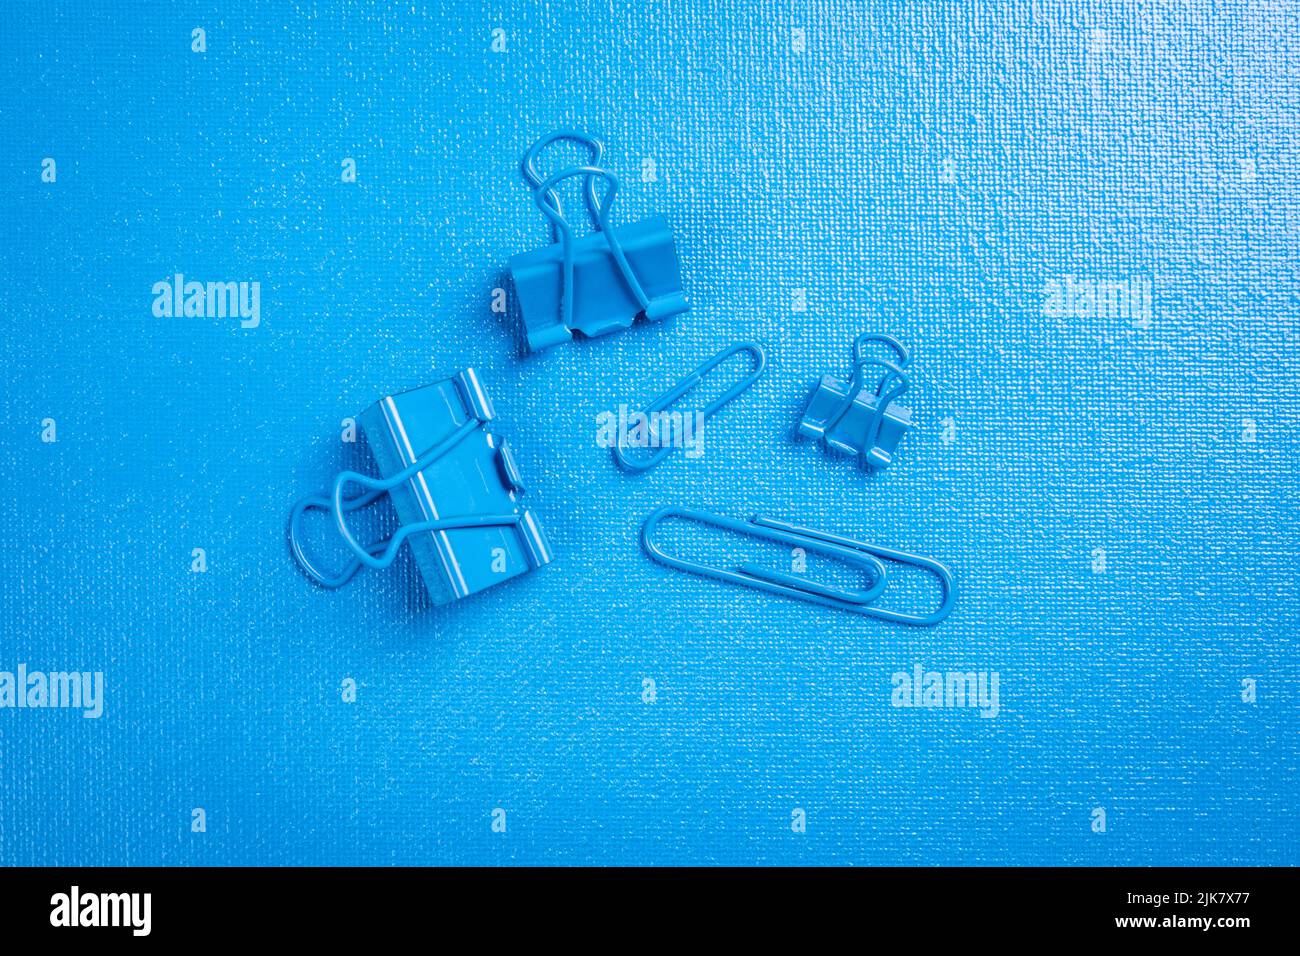 Paper clips and binder clips on a blue textured background. Stock Photo